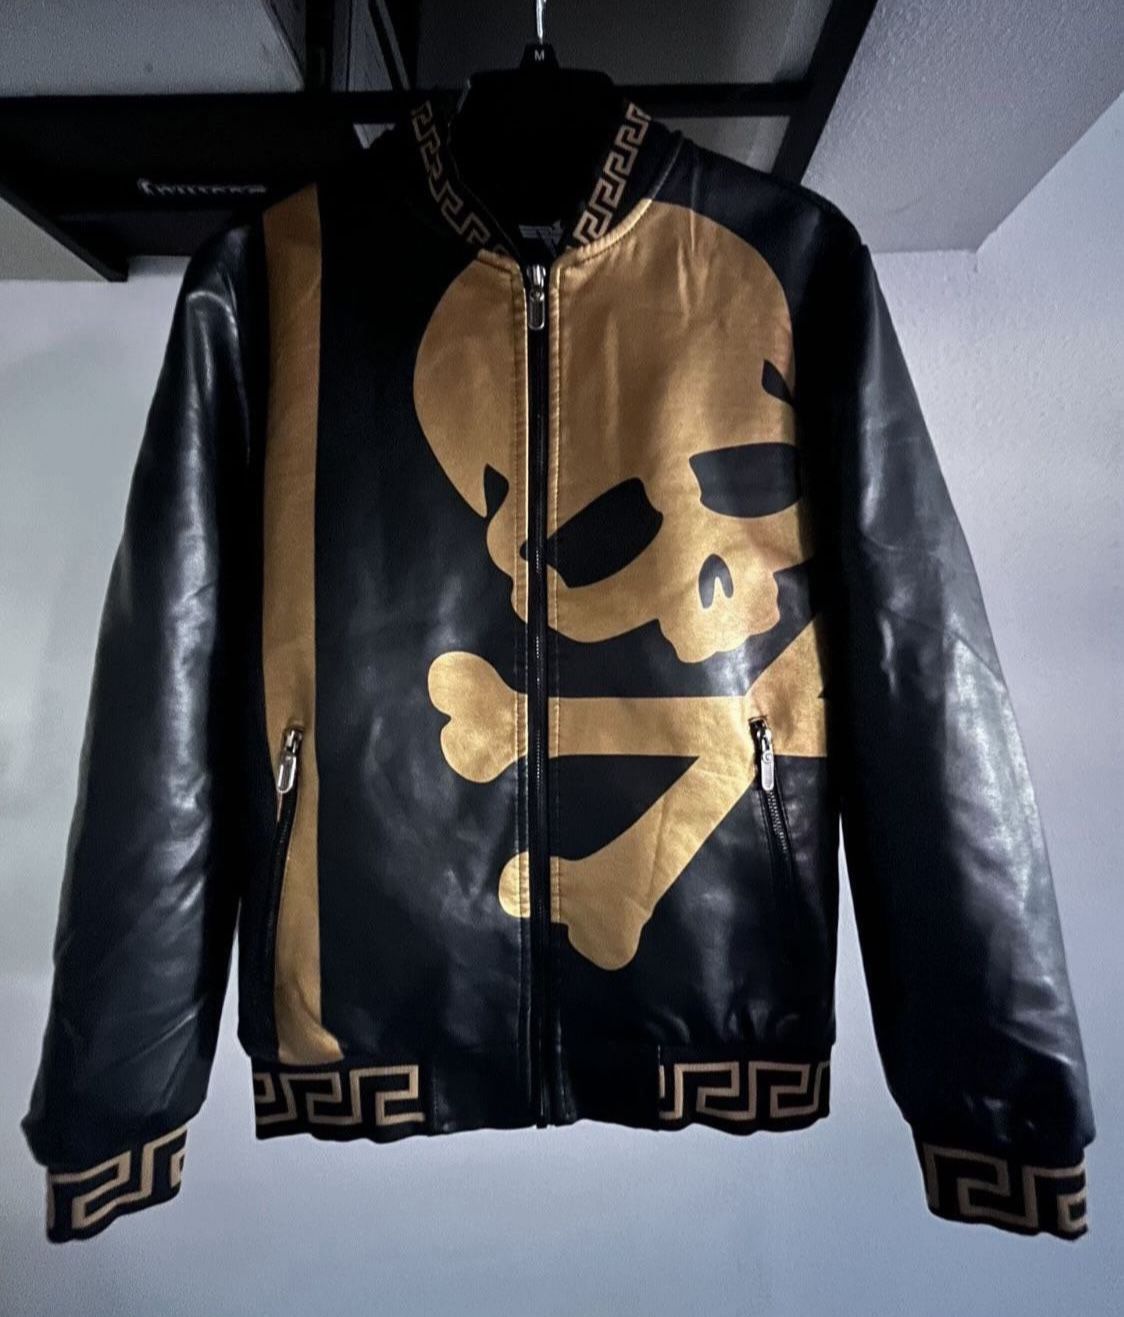 New Black & Gold Skull PU Leather Jackets Mens Small